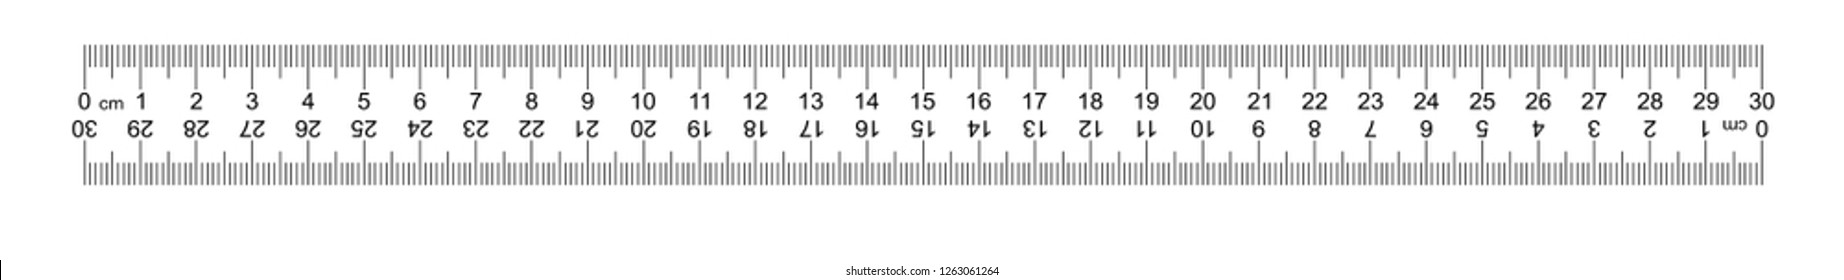 30cm ruler in inches